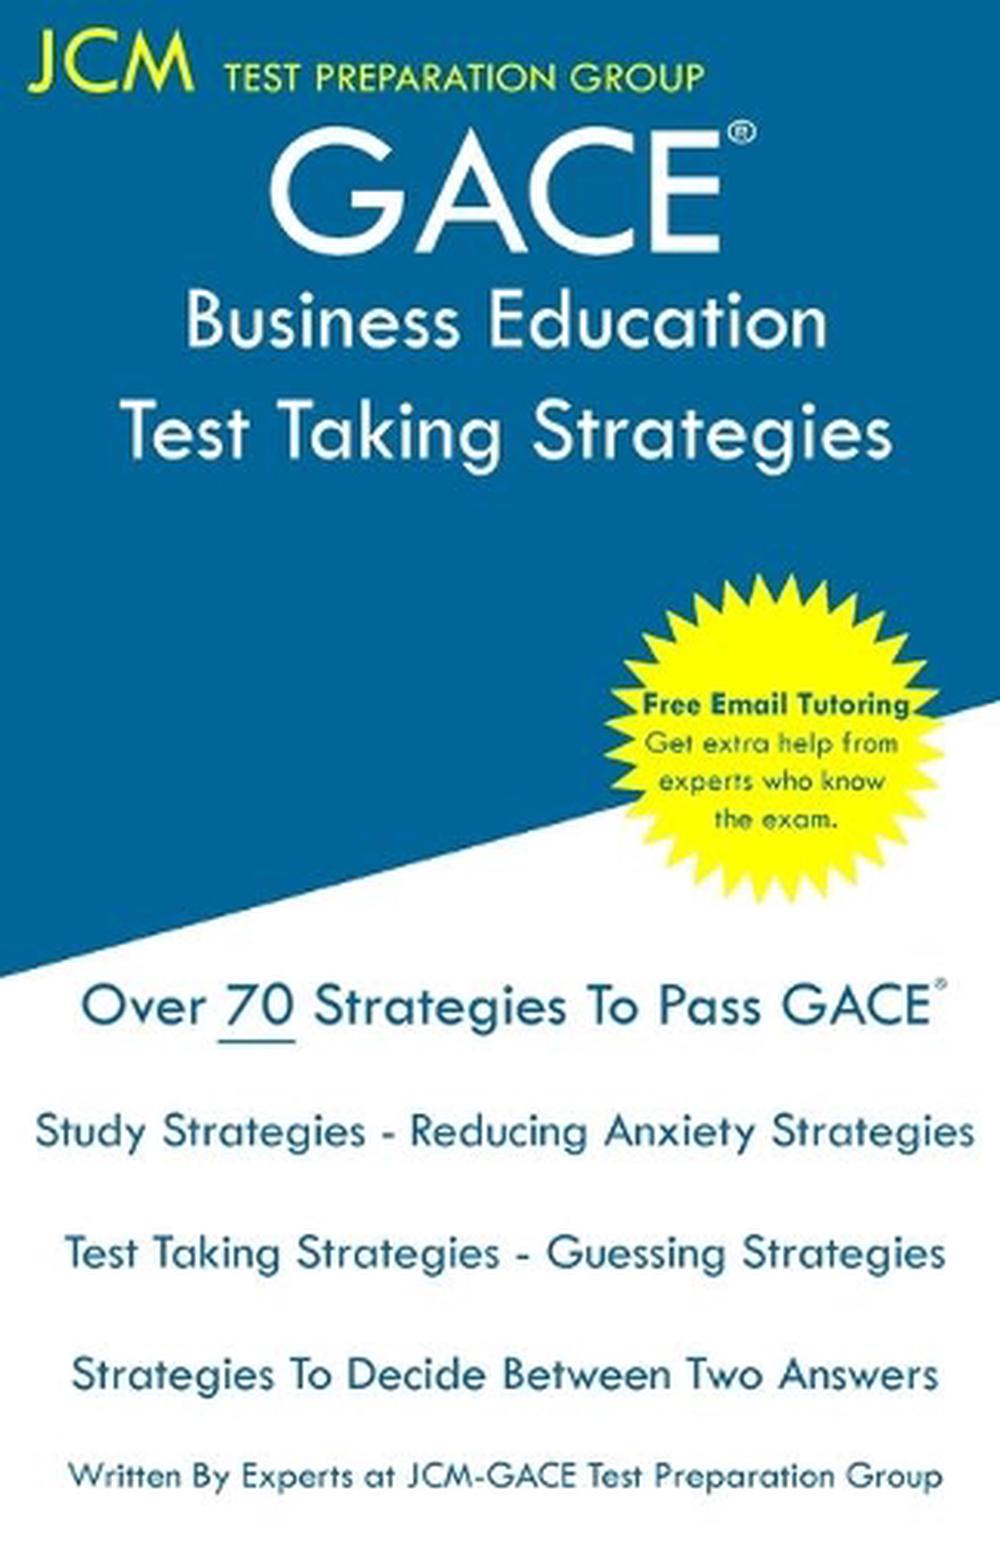 GACE Business Education Test Taking Strategies by Preparation Group